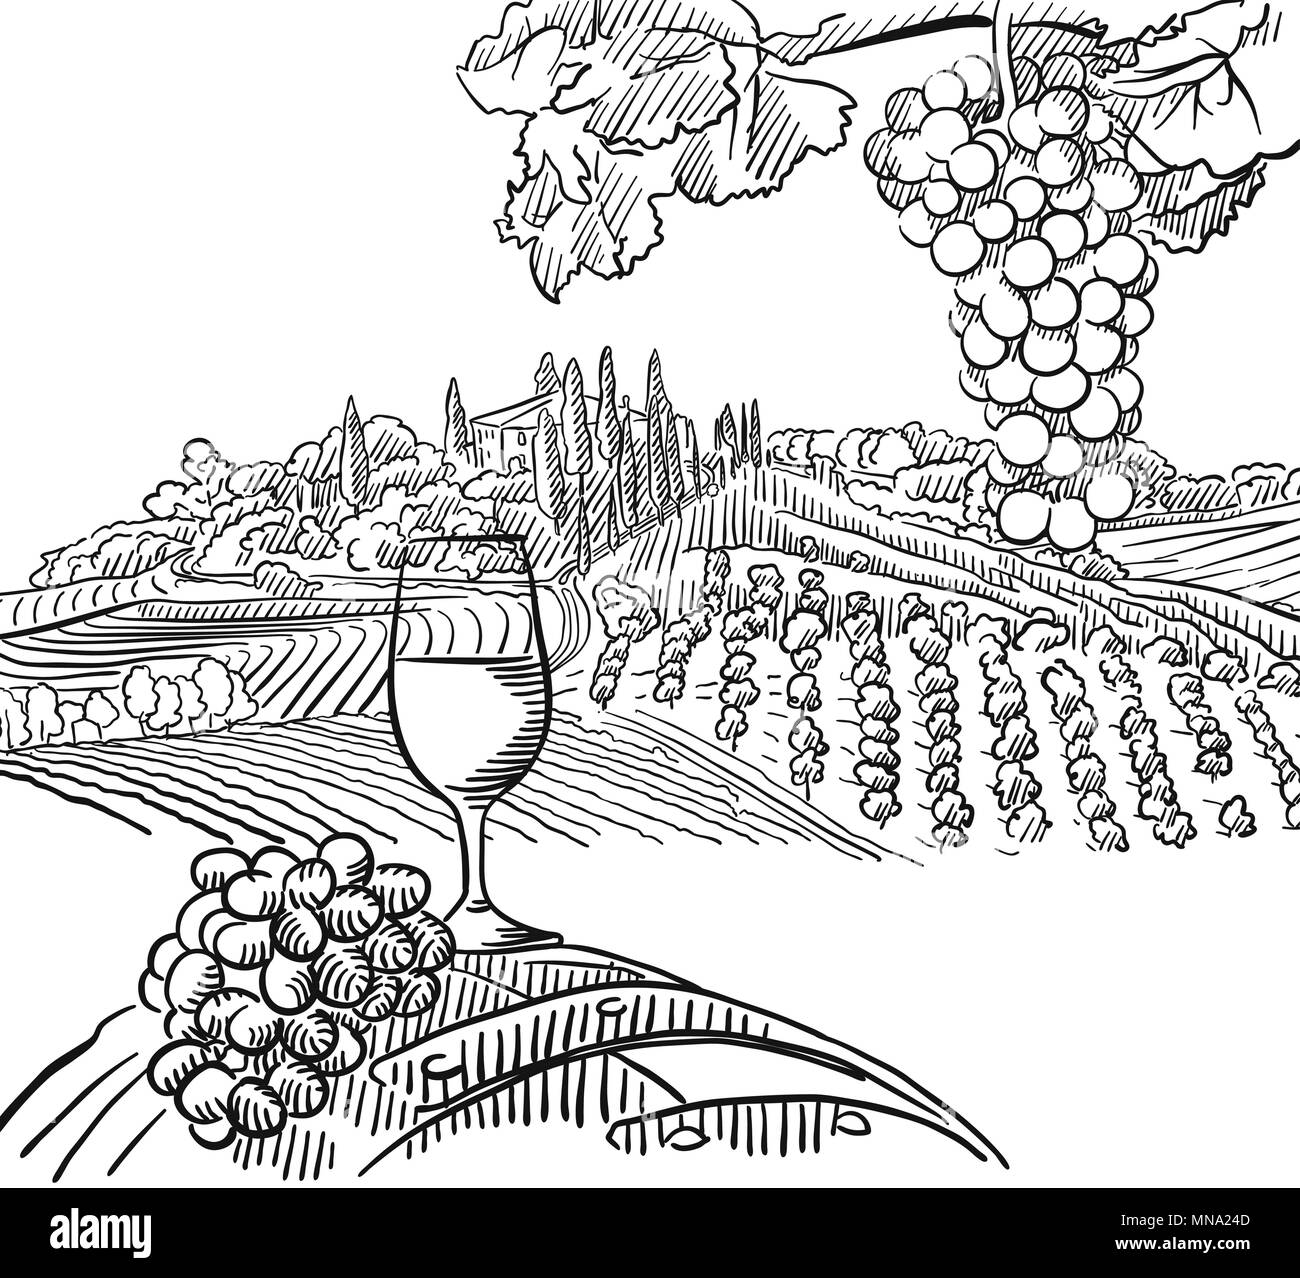 Vineyard Composition with Grapes and Glass of Vine, Vector Sketched Outline Artwork Stock Vector